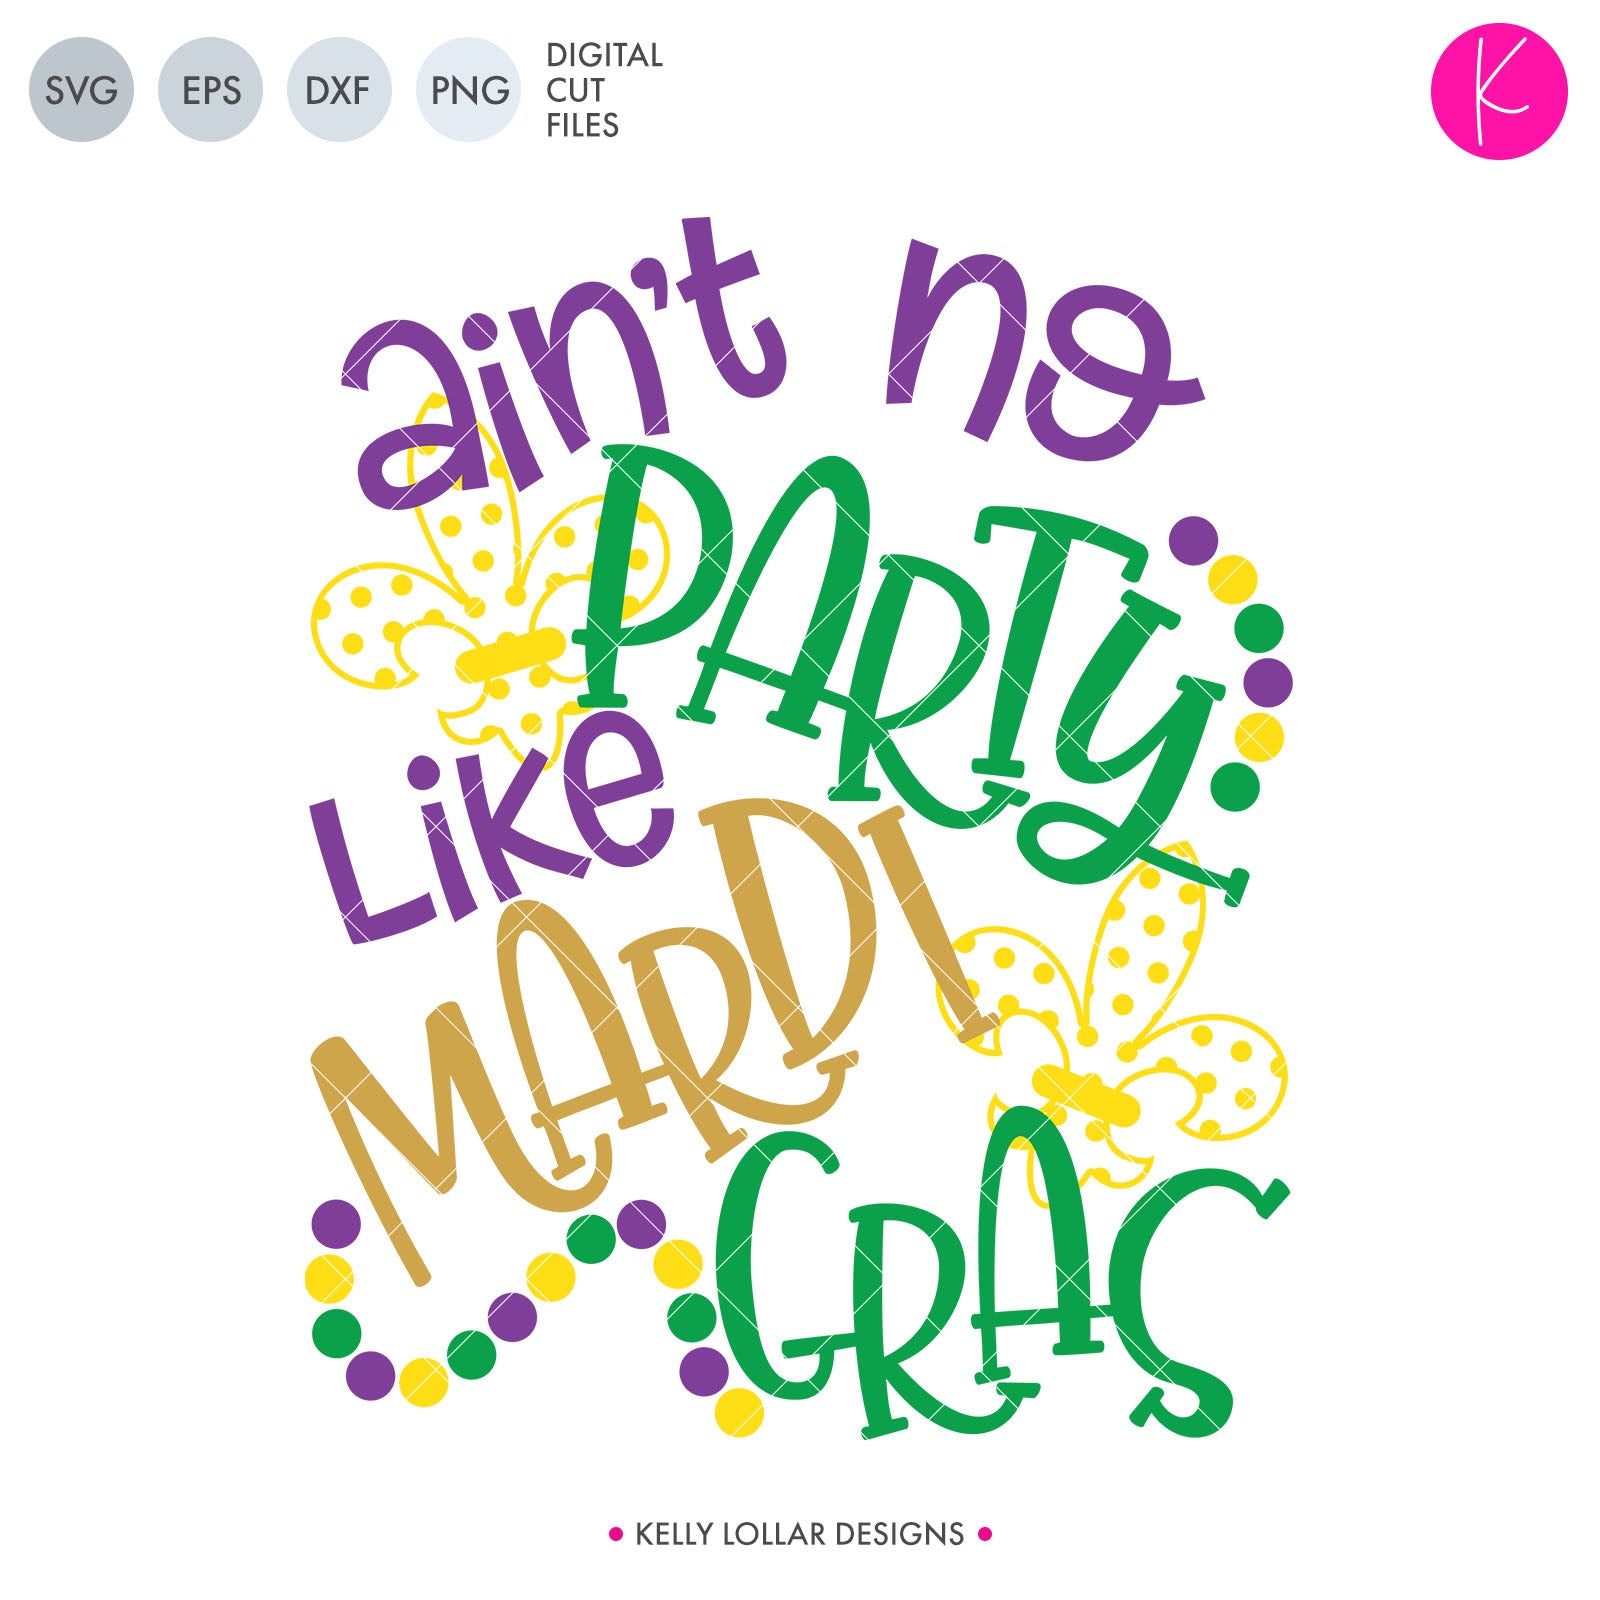 Download Ain't No Party Like Mardi Gras SVG File | Kelly Lollar Designs